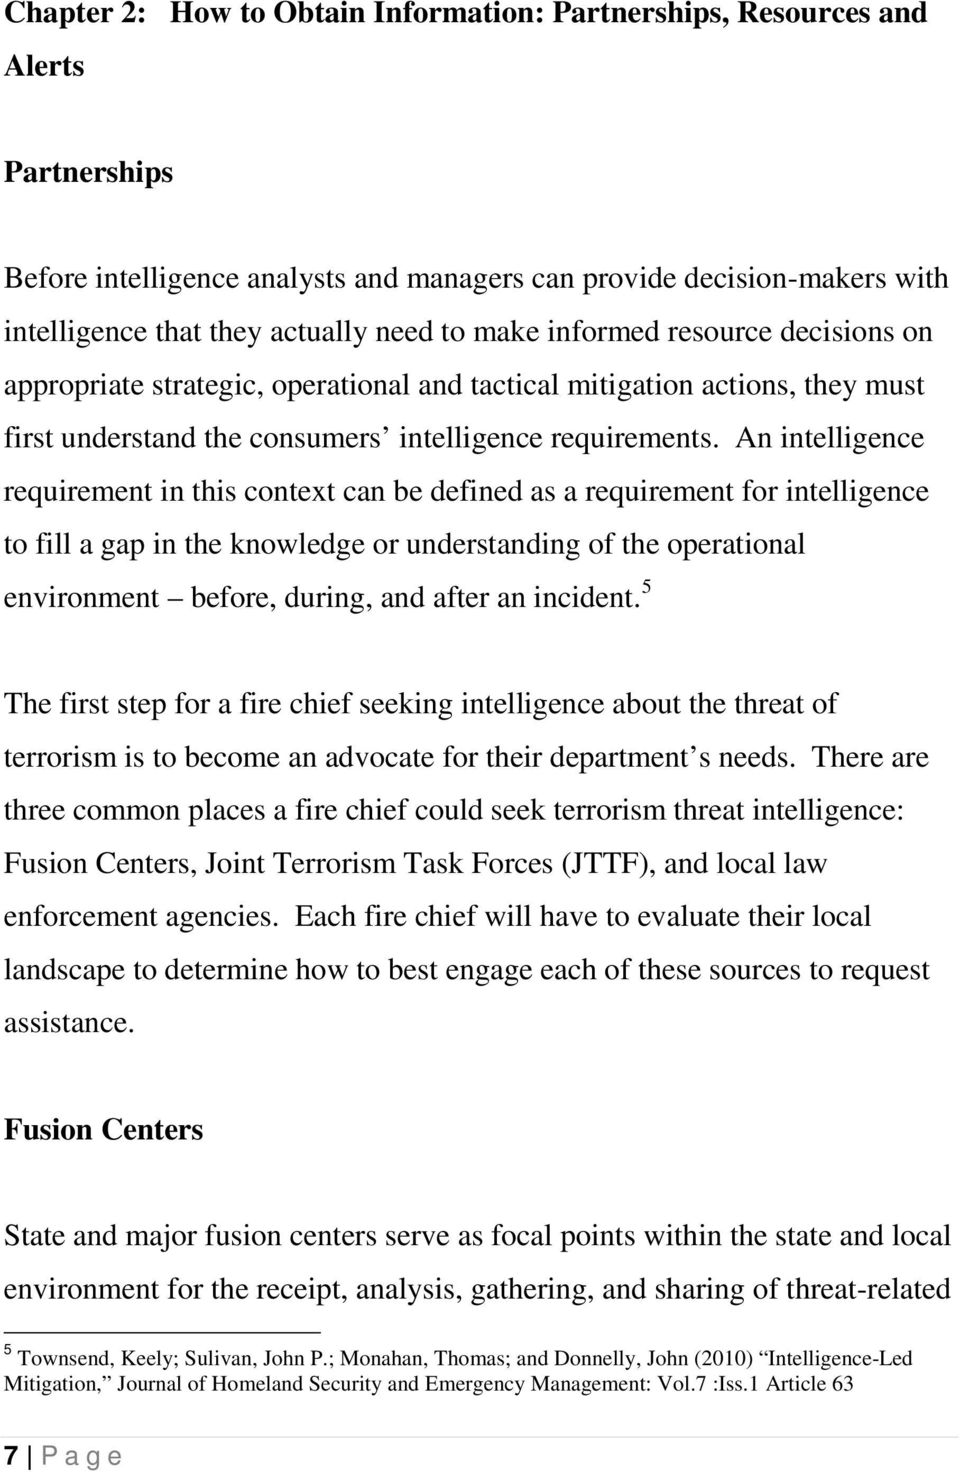 An intelligence requirement in this context can be defined as a requirement for intelligence to fill a gap in the knowledge or understanding of the operational environment before, during, and after